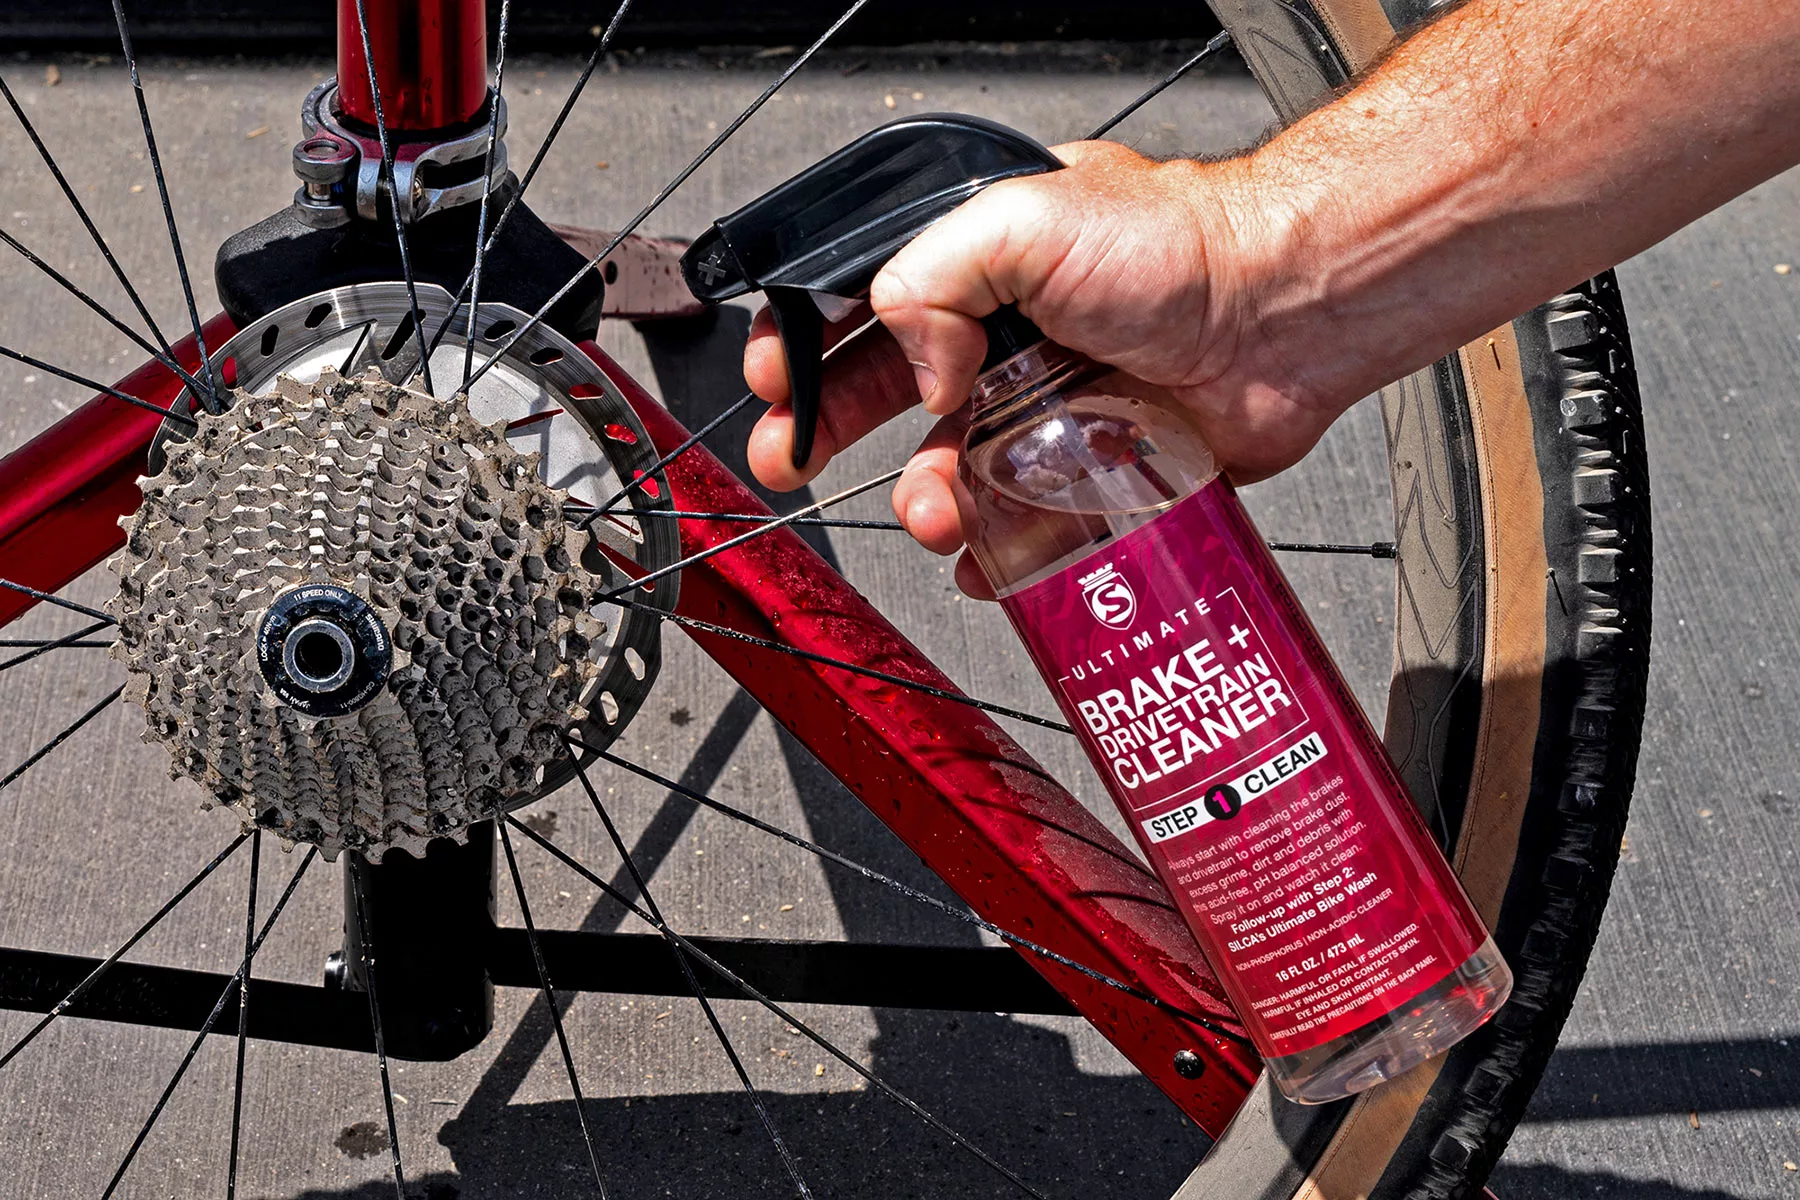 Silca Ultimate Bike Care product line of Bicycle Spa Collection, Step 1 cleaner